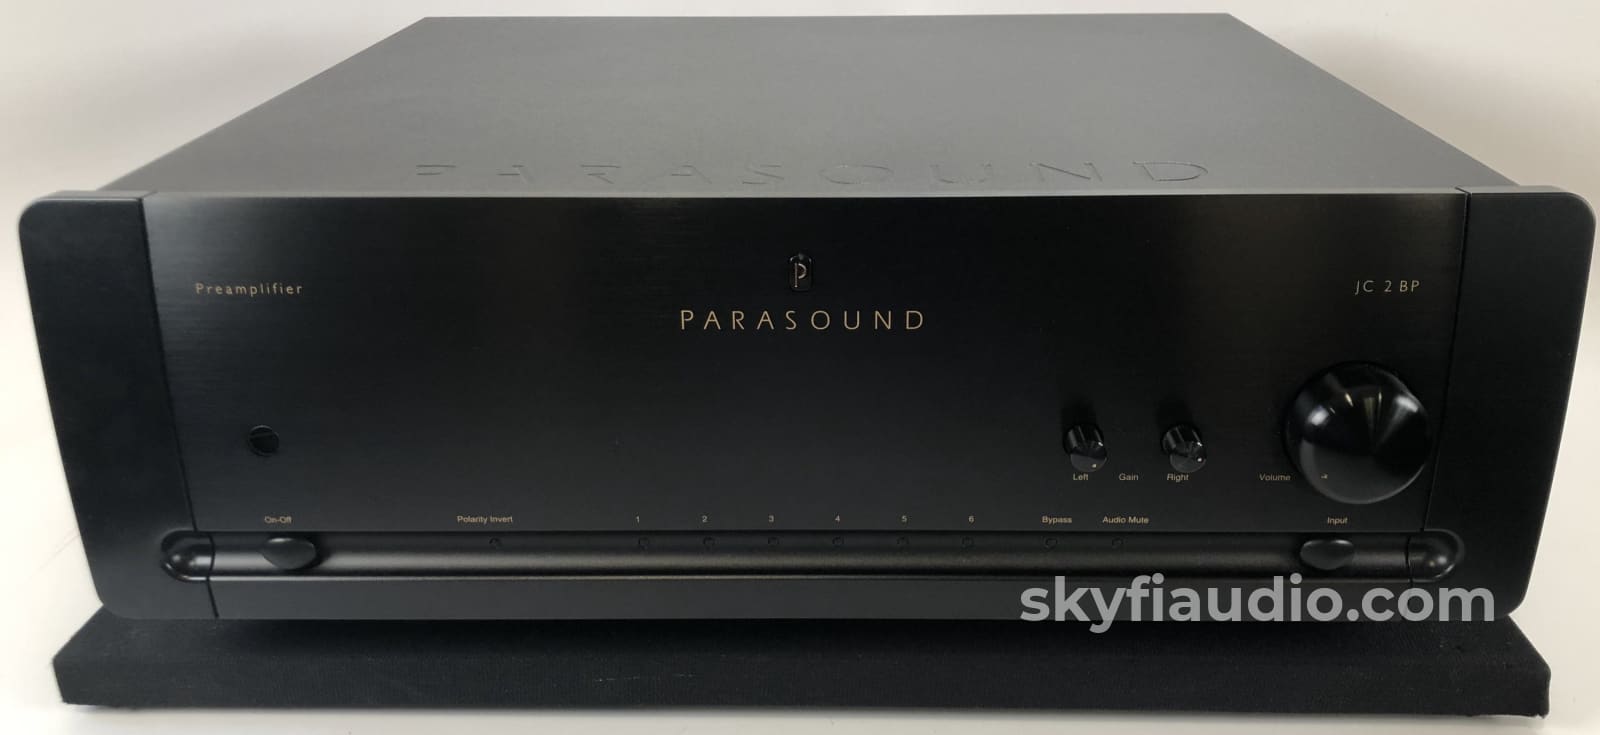 Parasound Halo Jc 2 Bp Preamp - Complete And Almost New (1 Of 2) Preamplifier